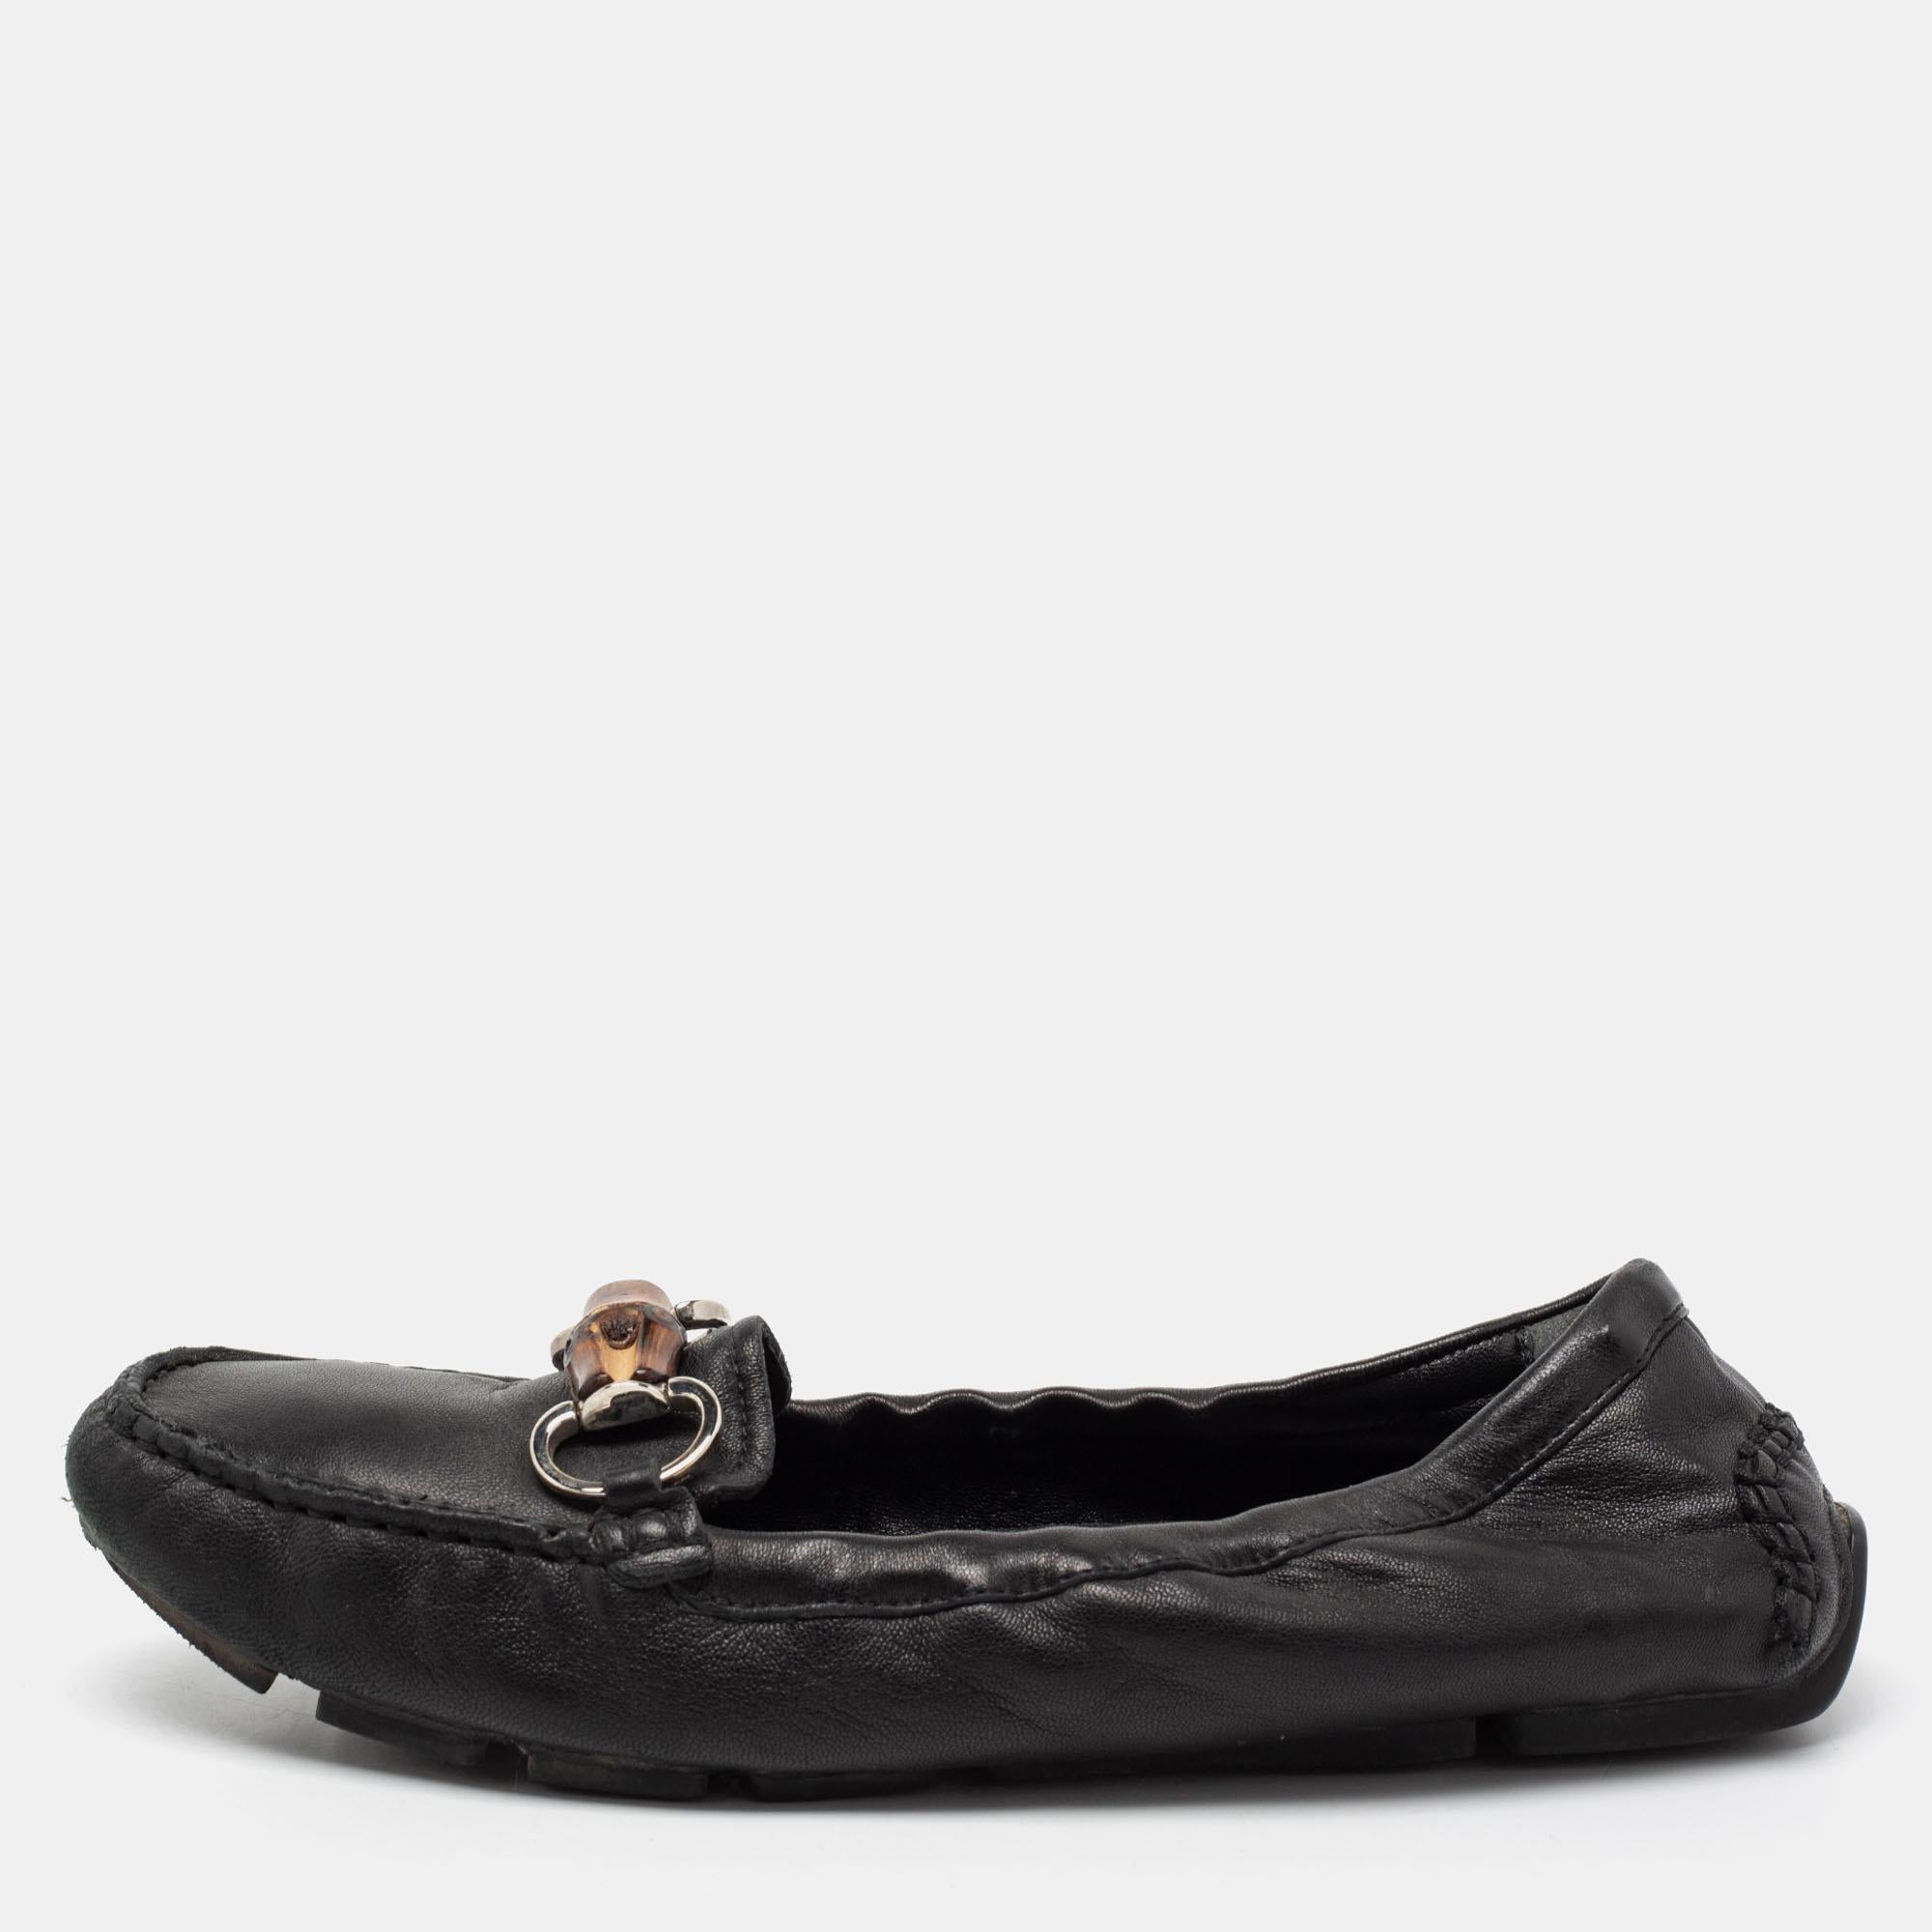 Ideal for office wear, these loafers from the house of Gucci are truly a class apart. Featuring smooth, supple leather uppers, round seamed toes, signature bamboo, and Horsebit detailing across the vamps, these shoe has rubber soles and